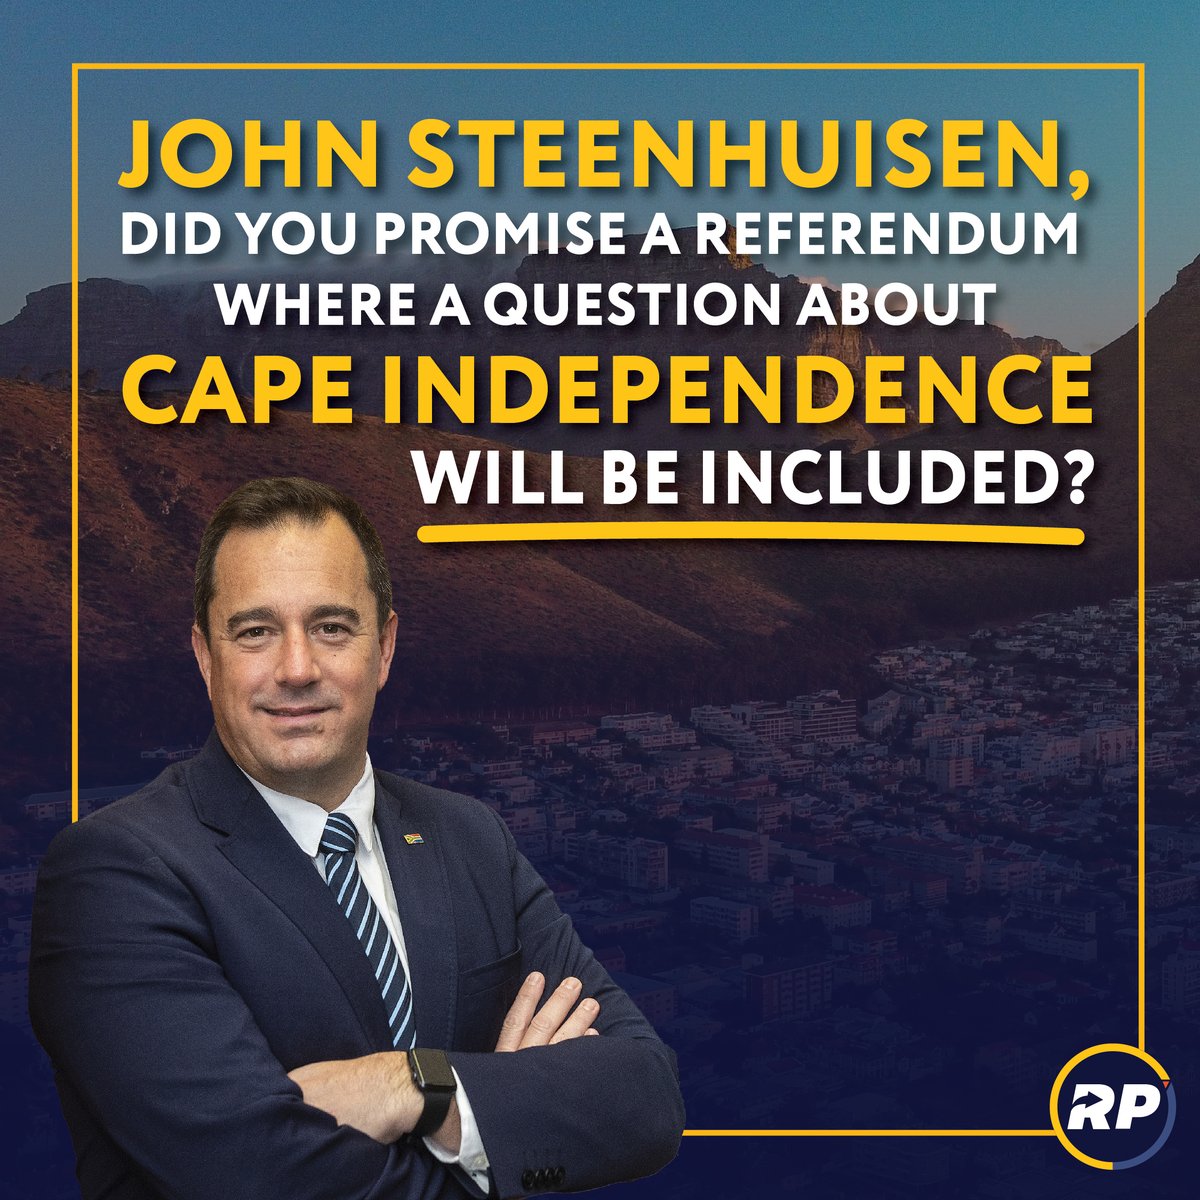 RP calls on John Steenhuisen to submit himself for a polygraph. 

#capeindependence